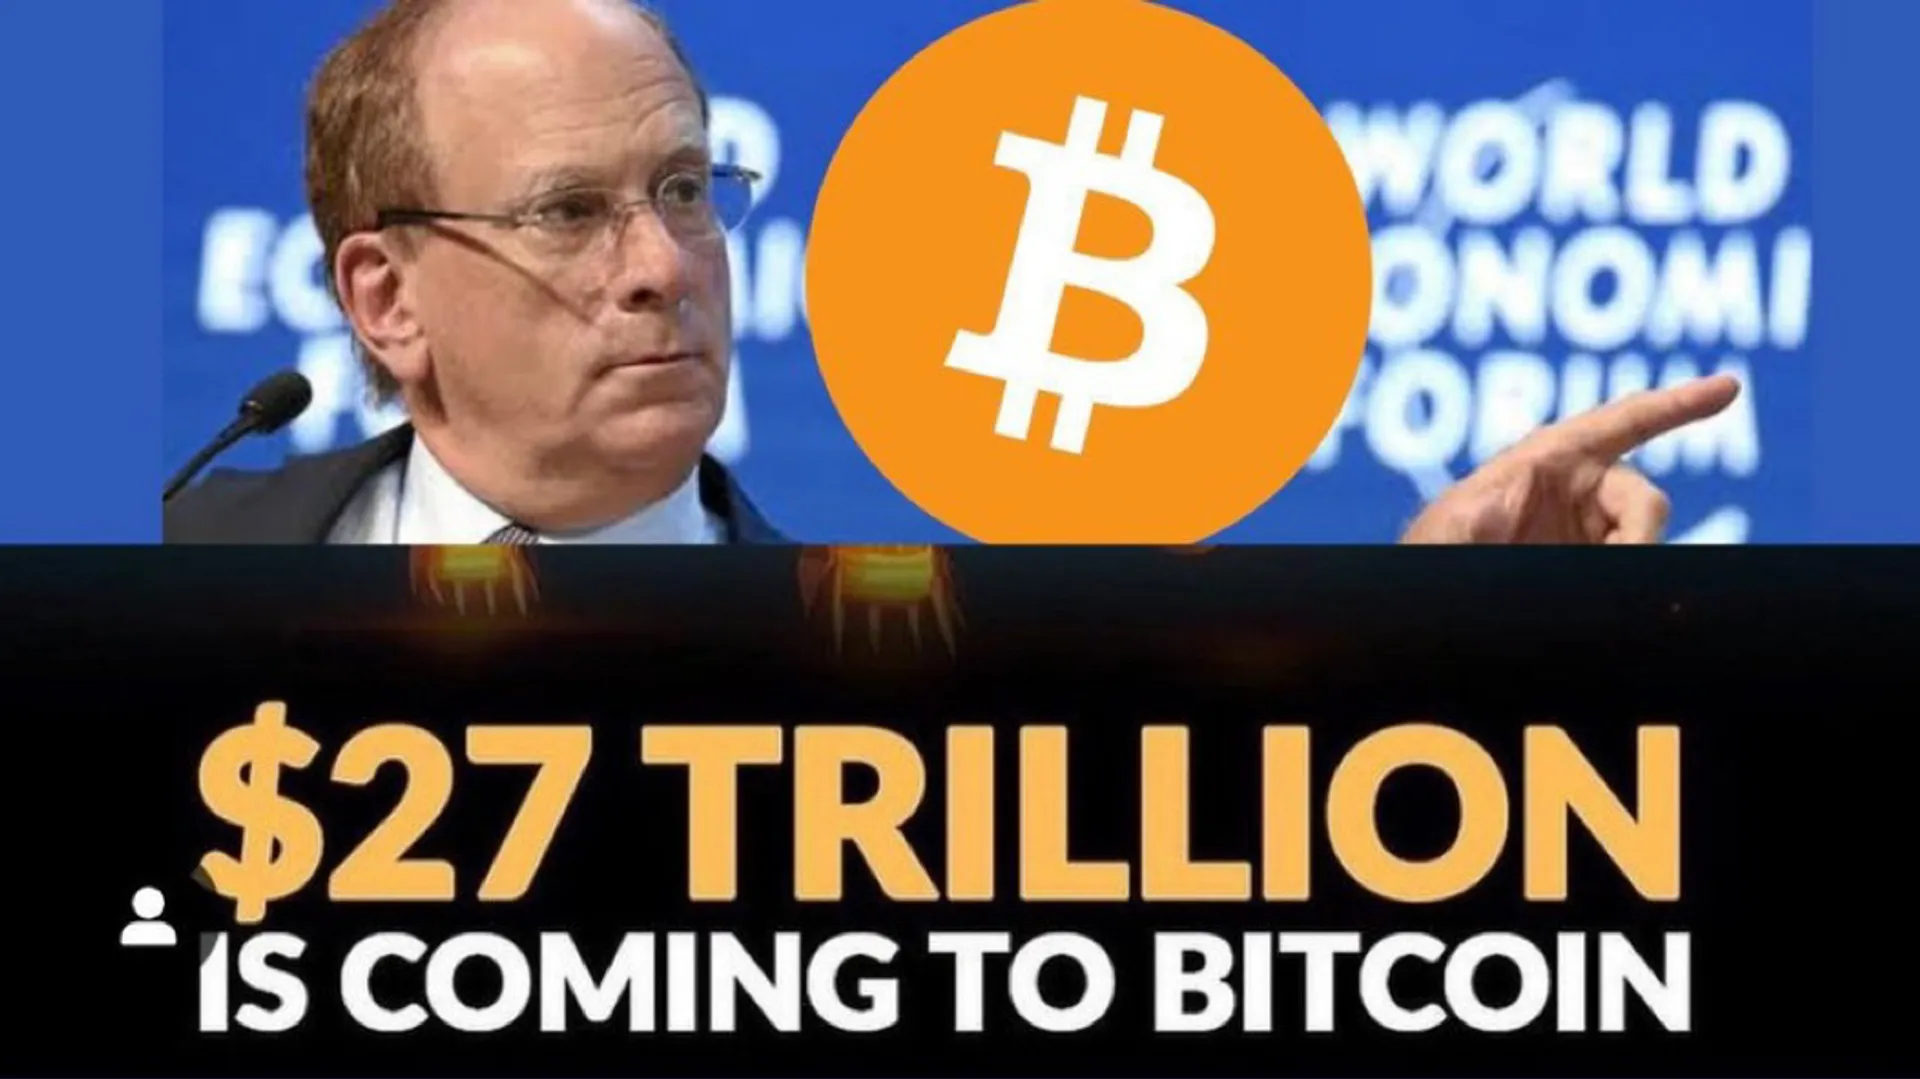 $27 TRILLION DOLLARS ARE COMING TO BITCOIN  IF ETF'S GOT APPROVED. FIND OUT WHEN THIS WILL HAPPEN WHEN YOU JOIN THE COMMUNITY TODAY! ^^^^^^click^^^^^^ 